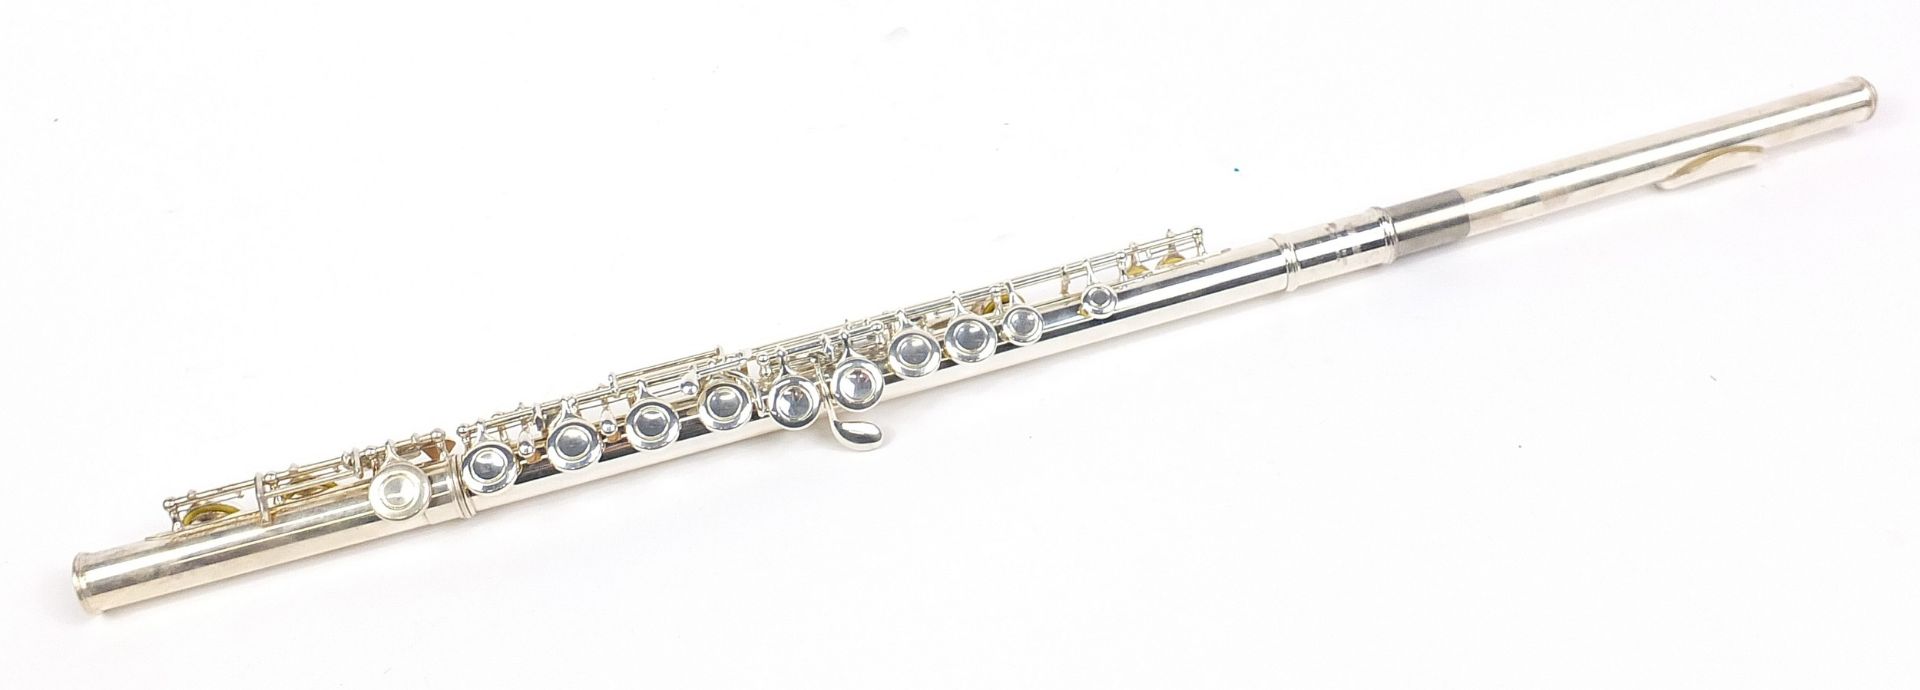 Yamaha silver plated three piece flute numbered 211SII, housed in a fitted case - Image 2 of 6